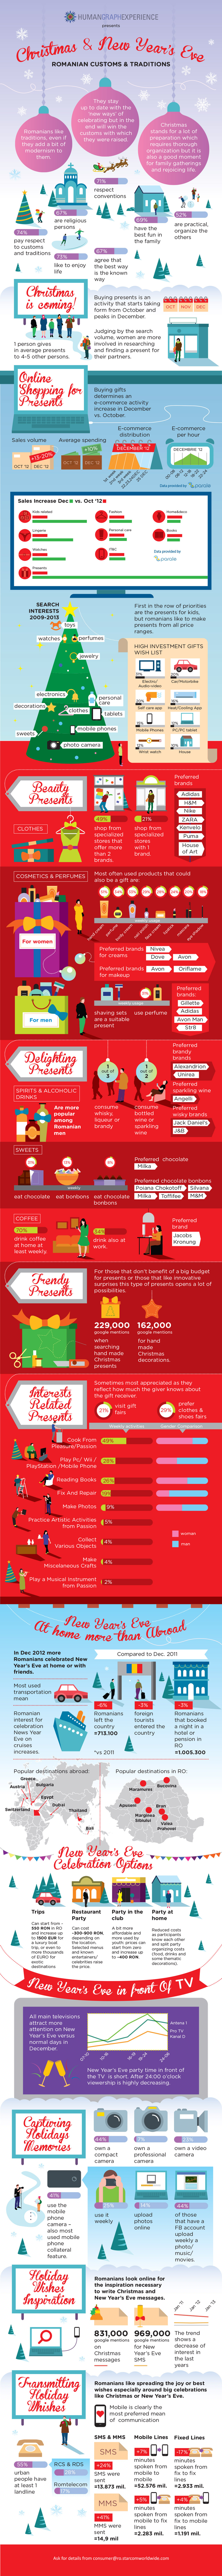 Christmas and New Year’s Eve - Romanian Customs and Traditions #Infographic 